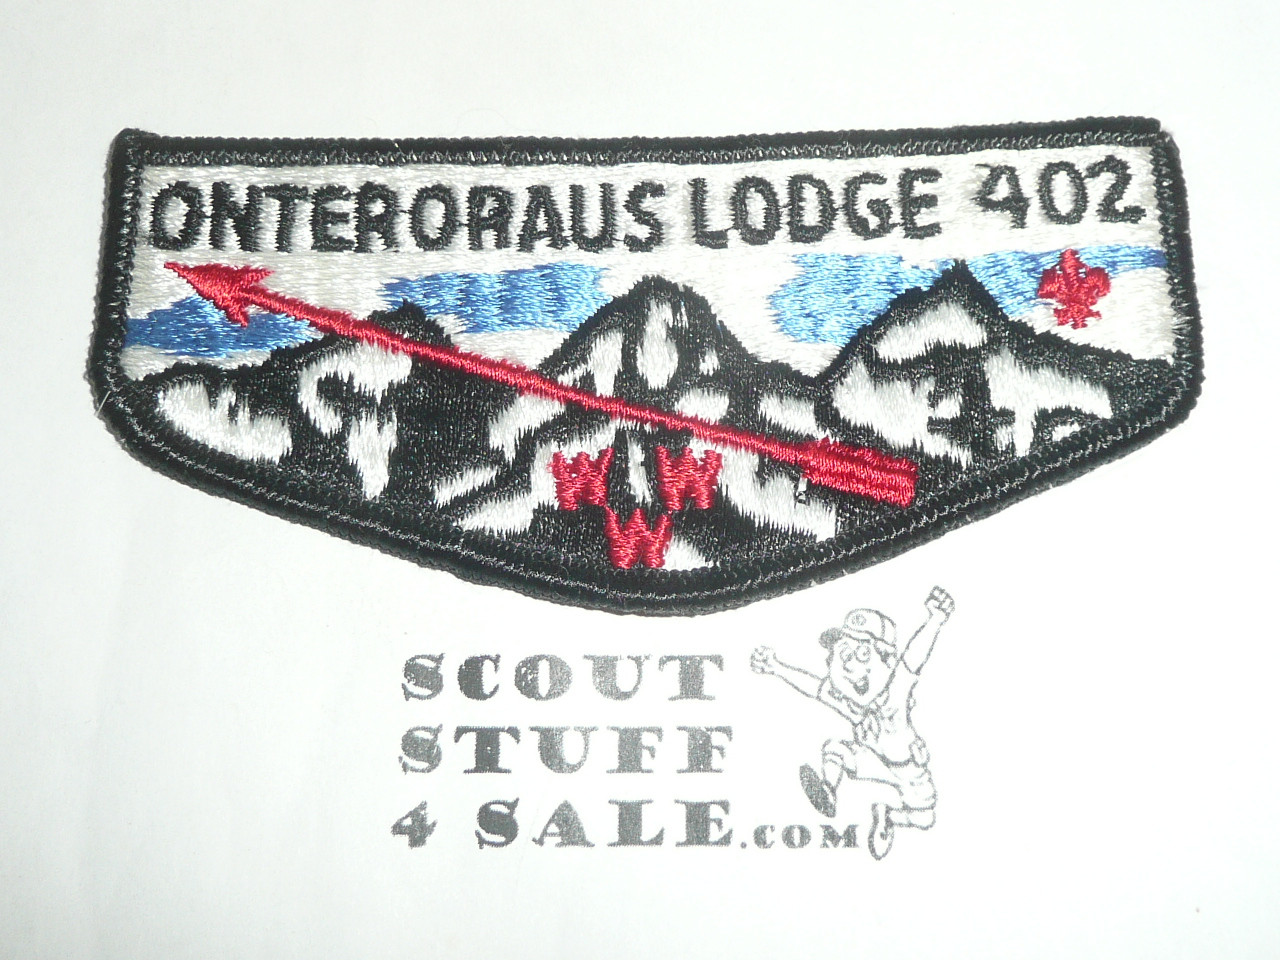 Order of the Arrow Lodge #402 Onteroraus s6 Flap Patch